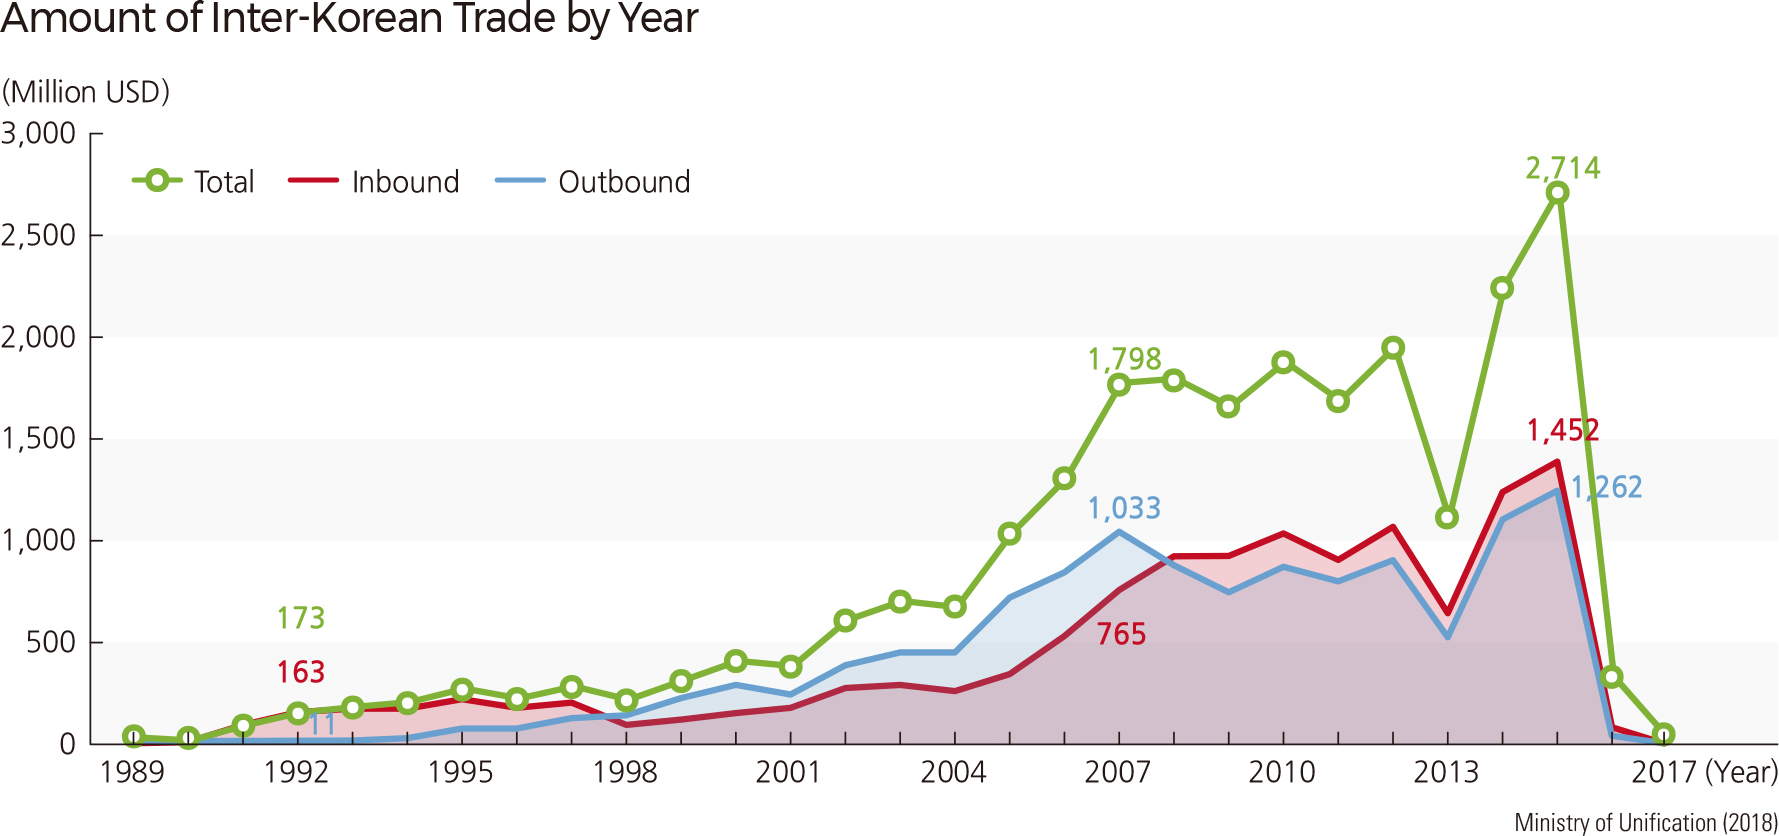 Amount of Inter-Korean Trade by Year